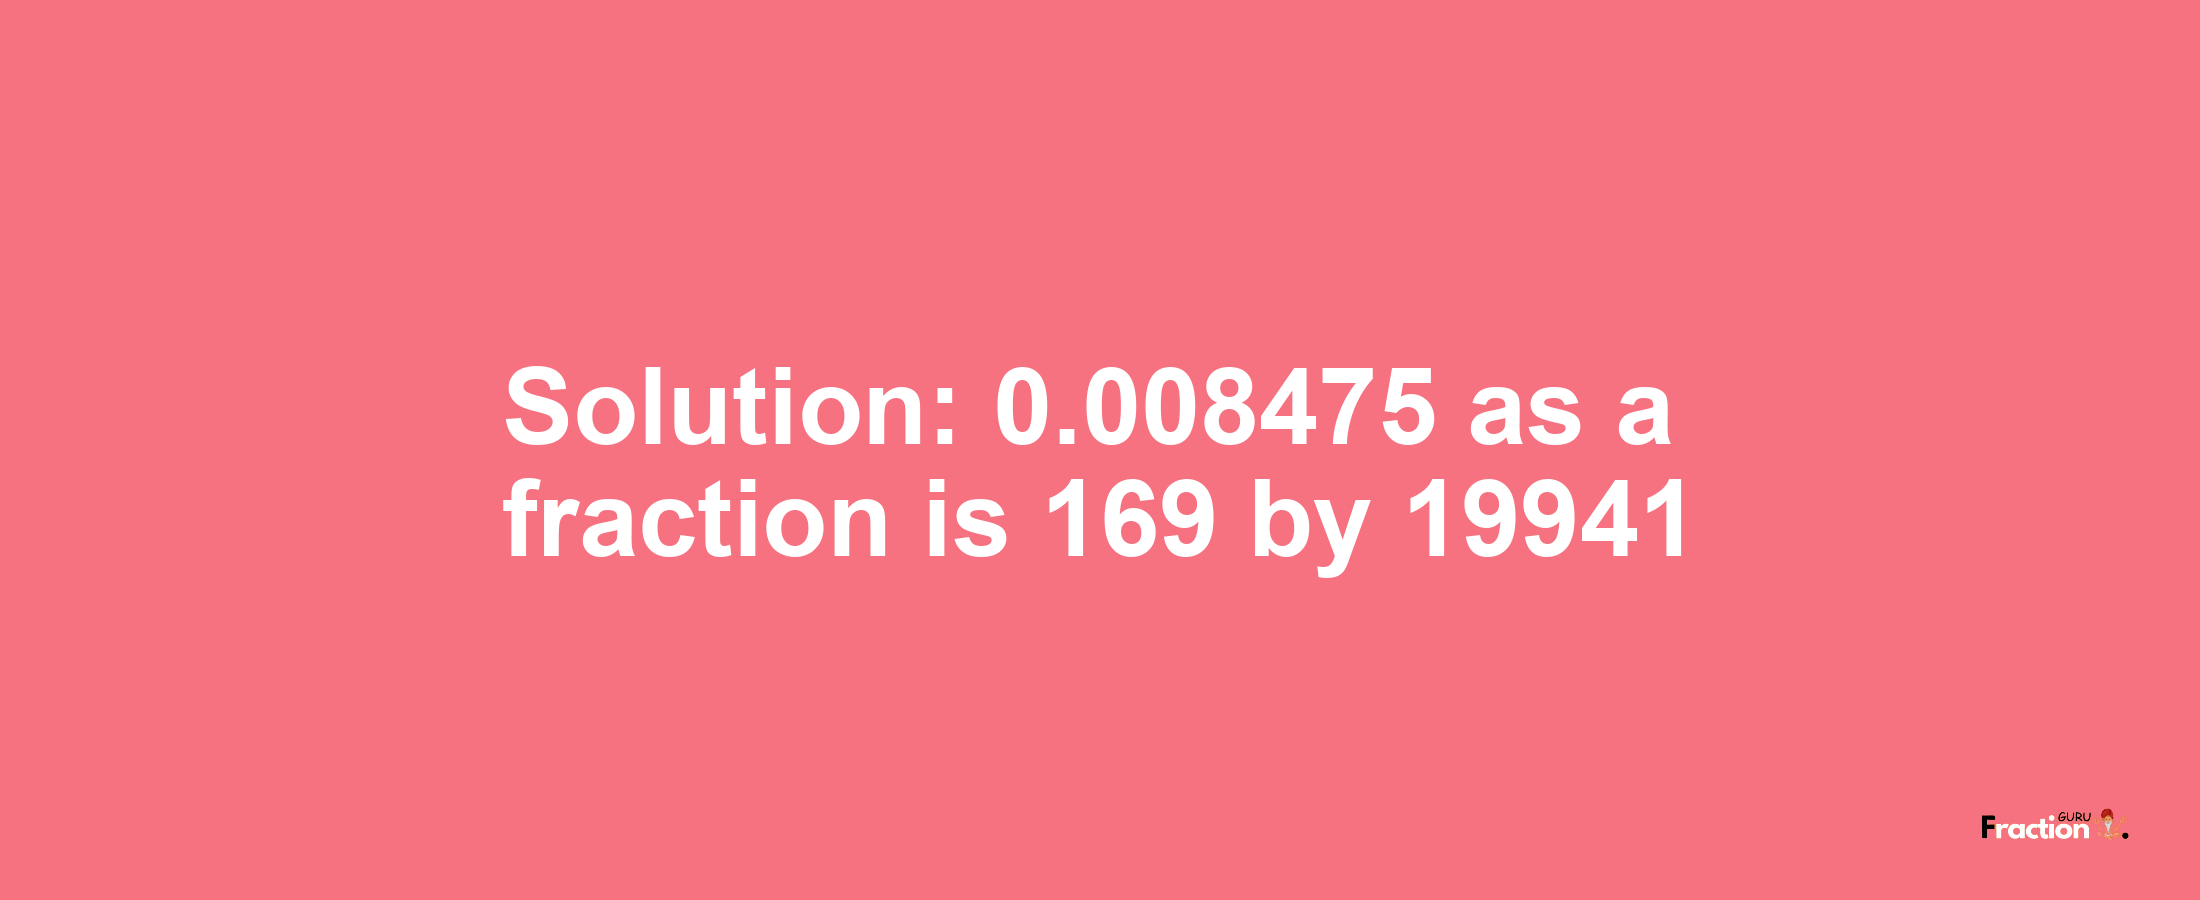 Solution:0.008475 as a fraction is 169/19941